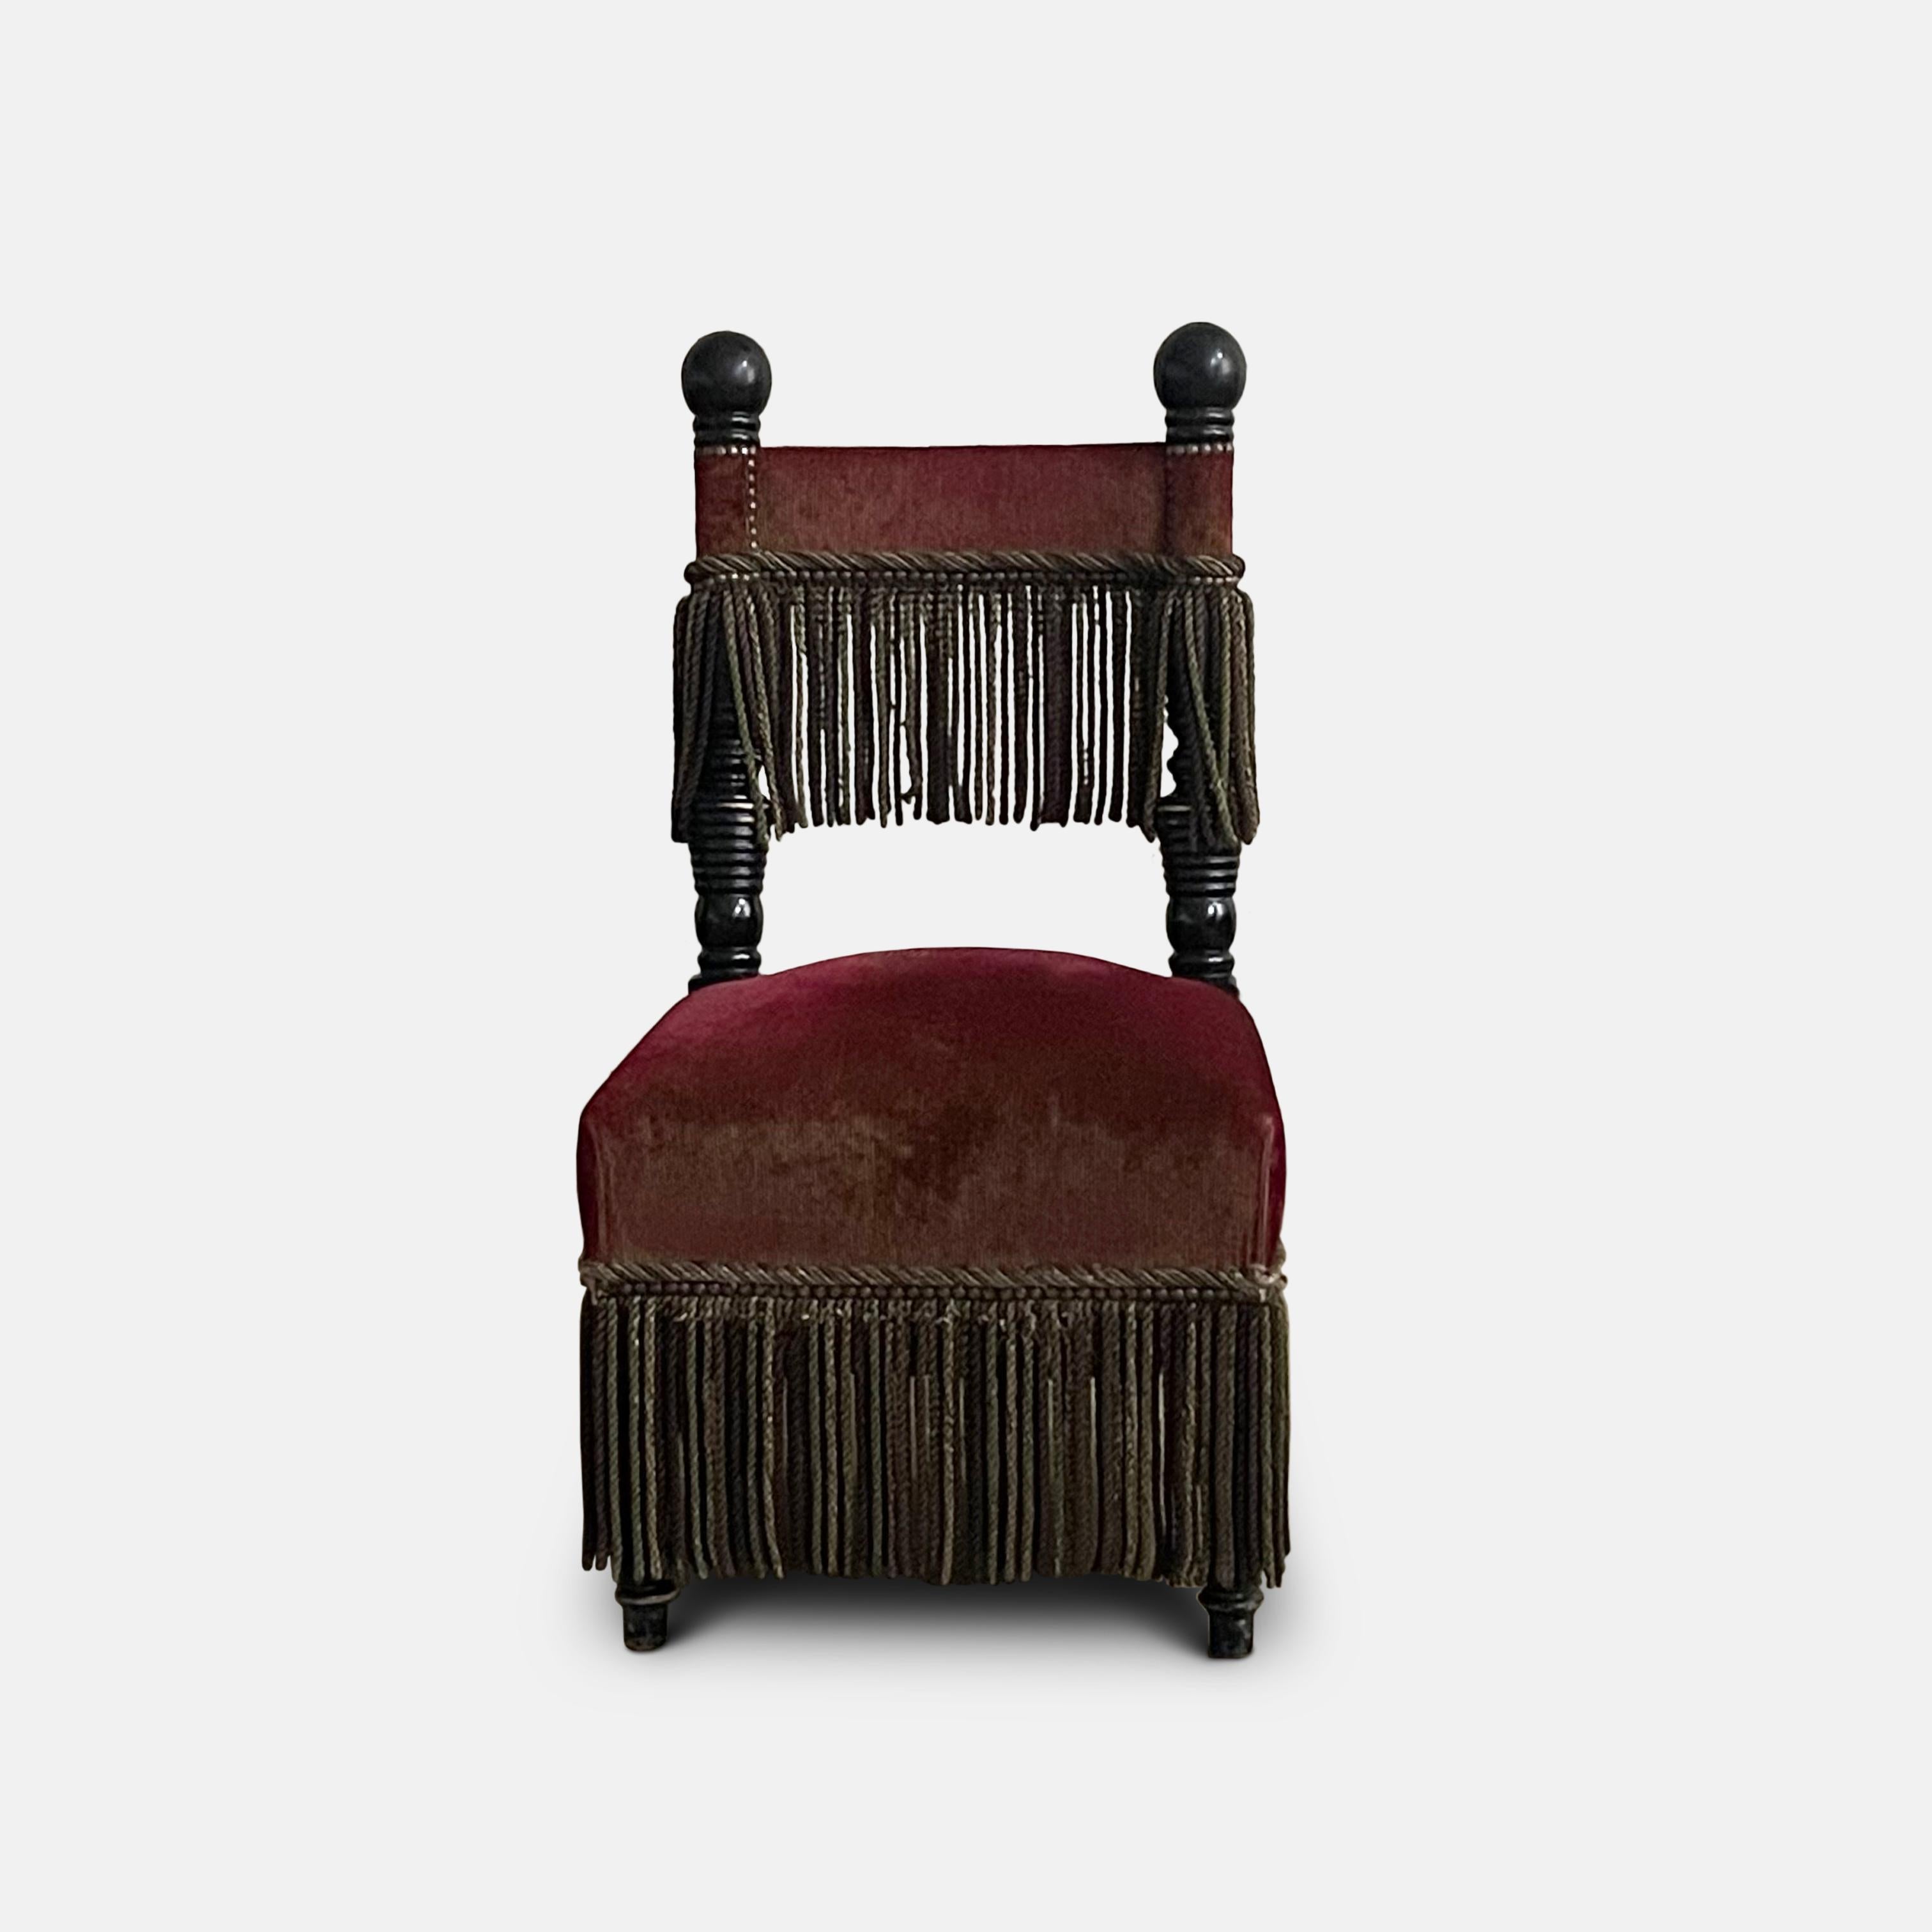 Fringed Chairs From Ladurée Patisserie For Sale 3